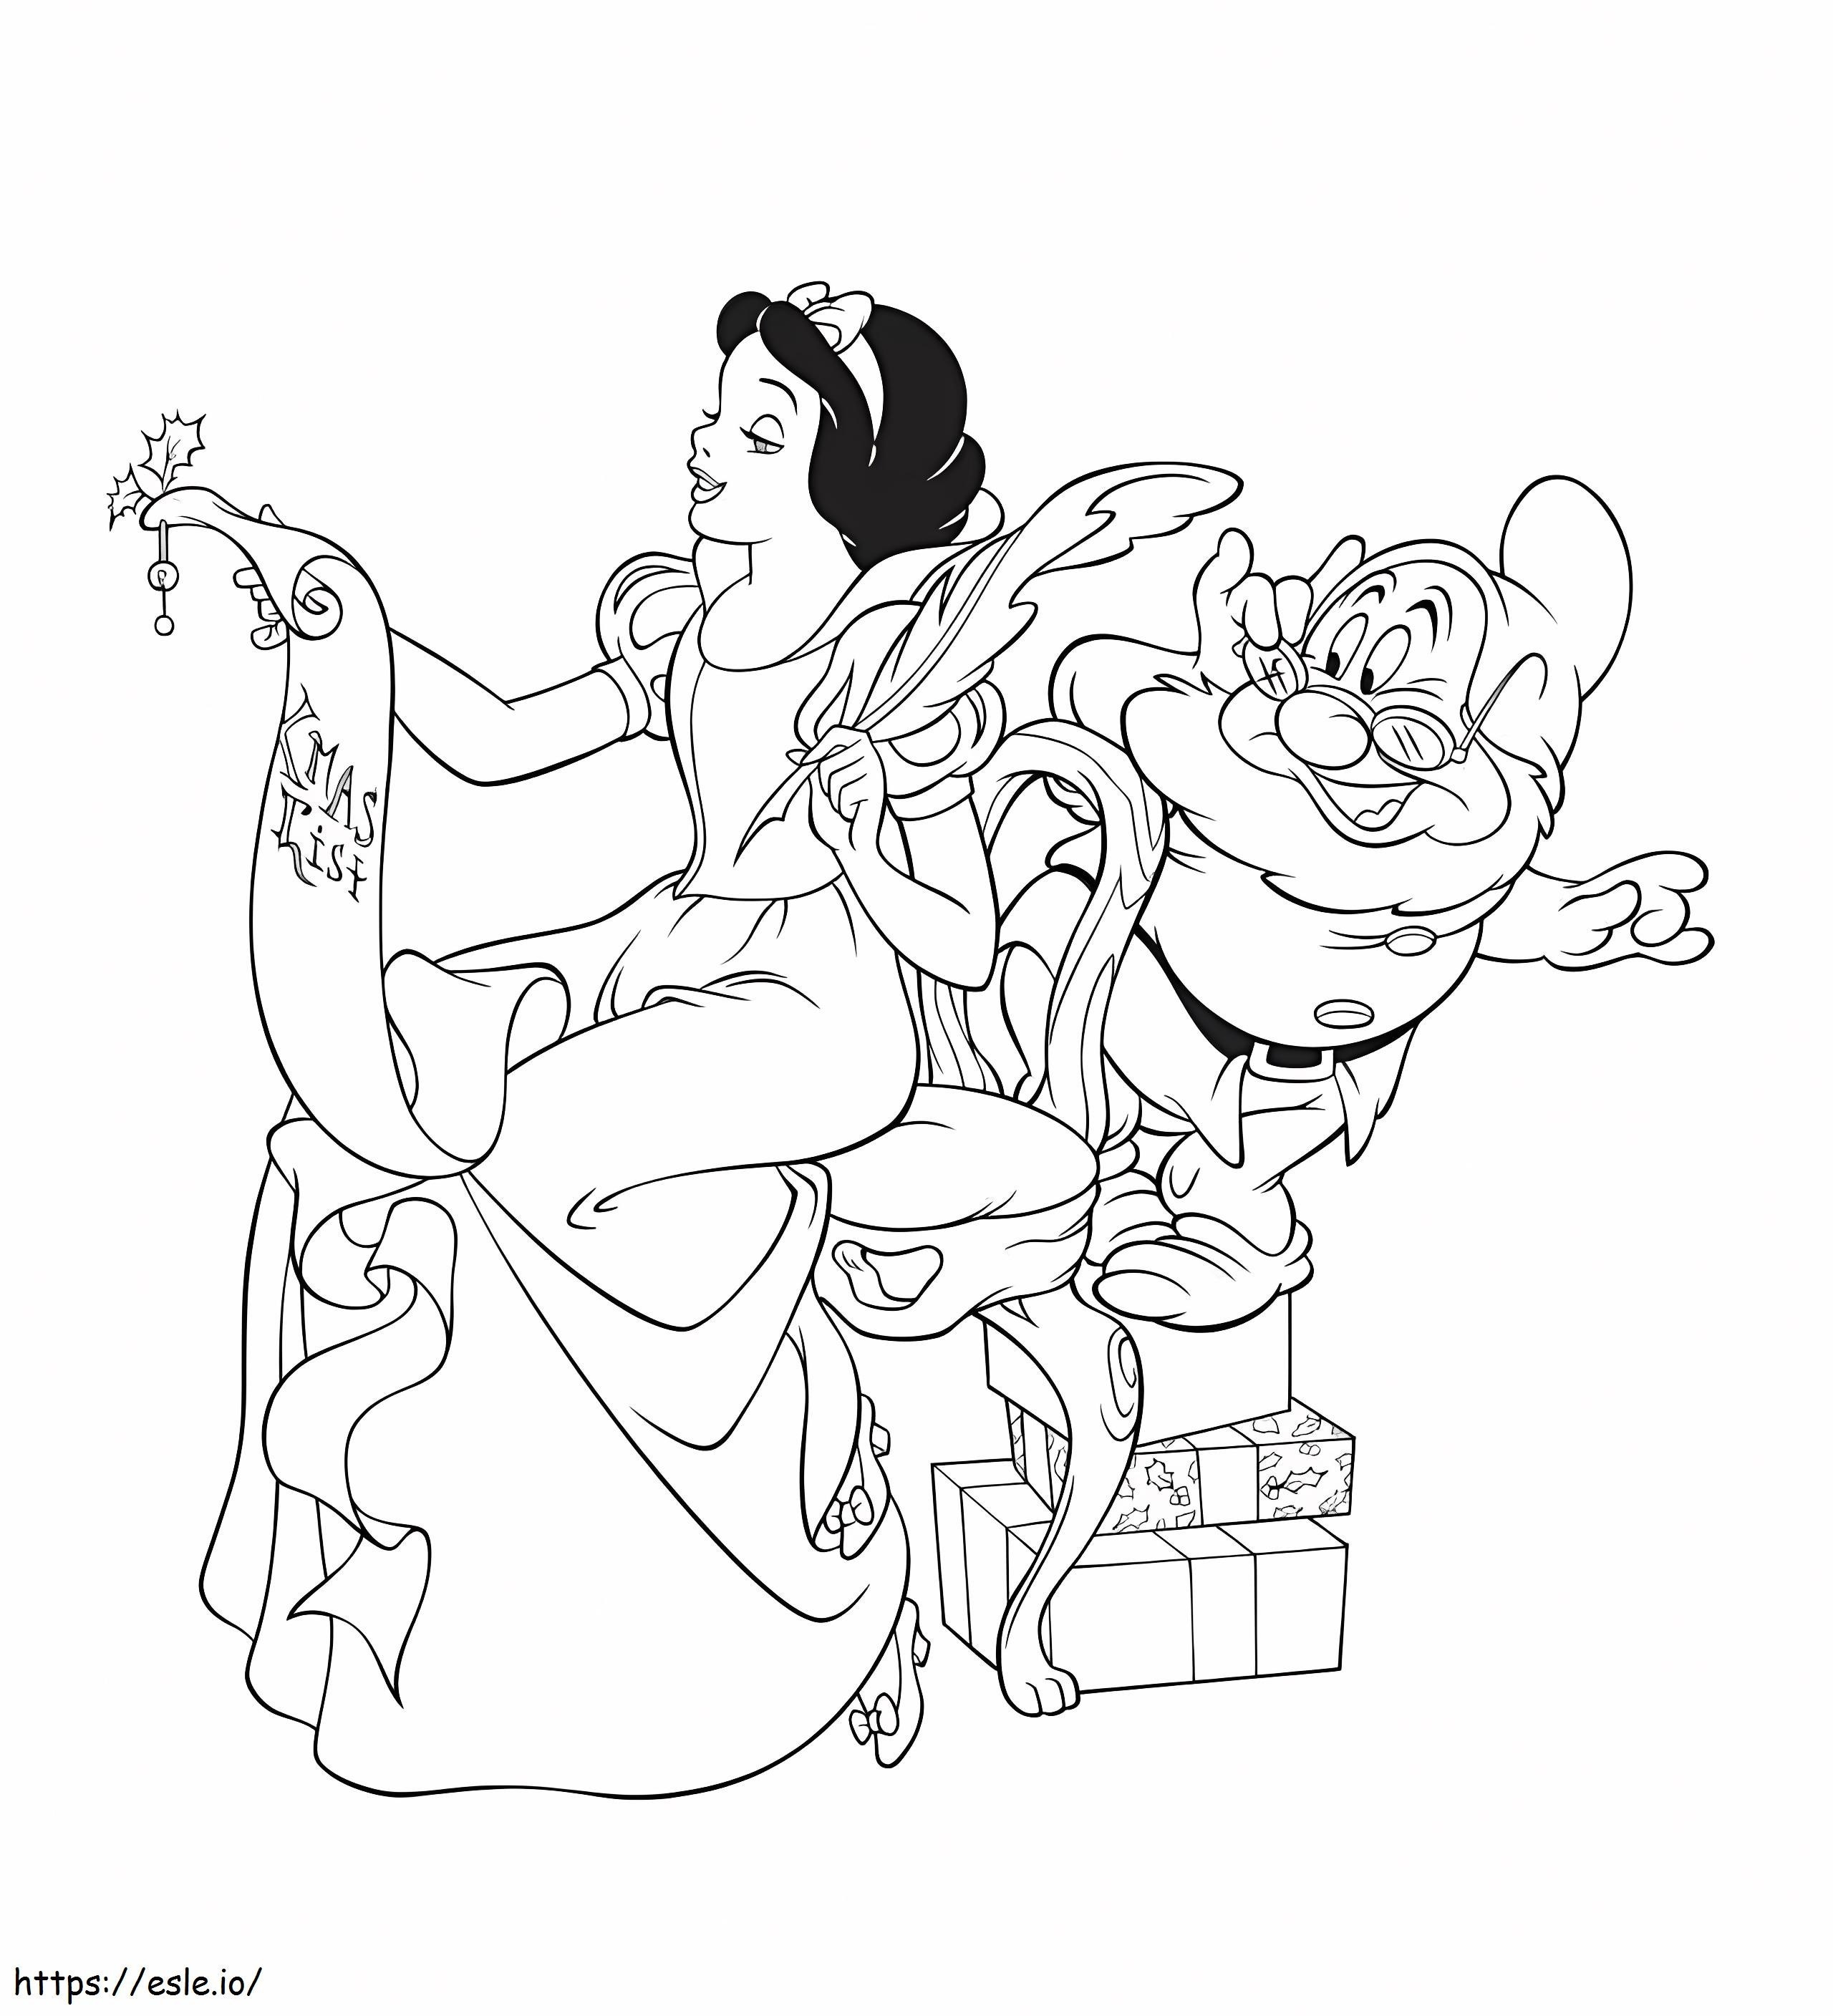 Snow White On Christmas coloring page